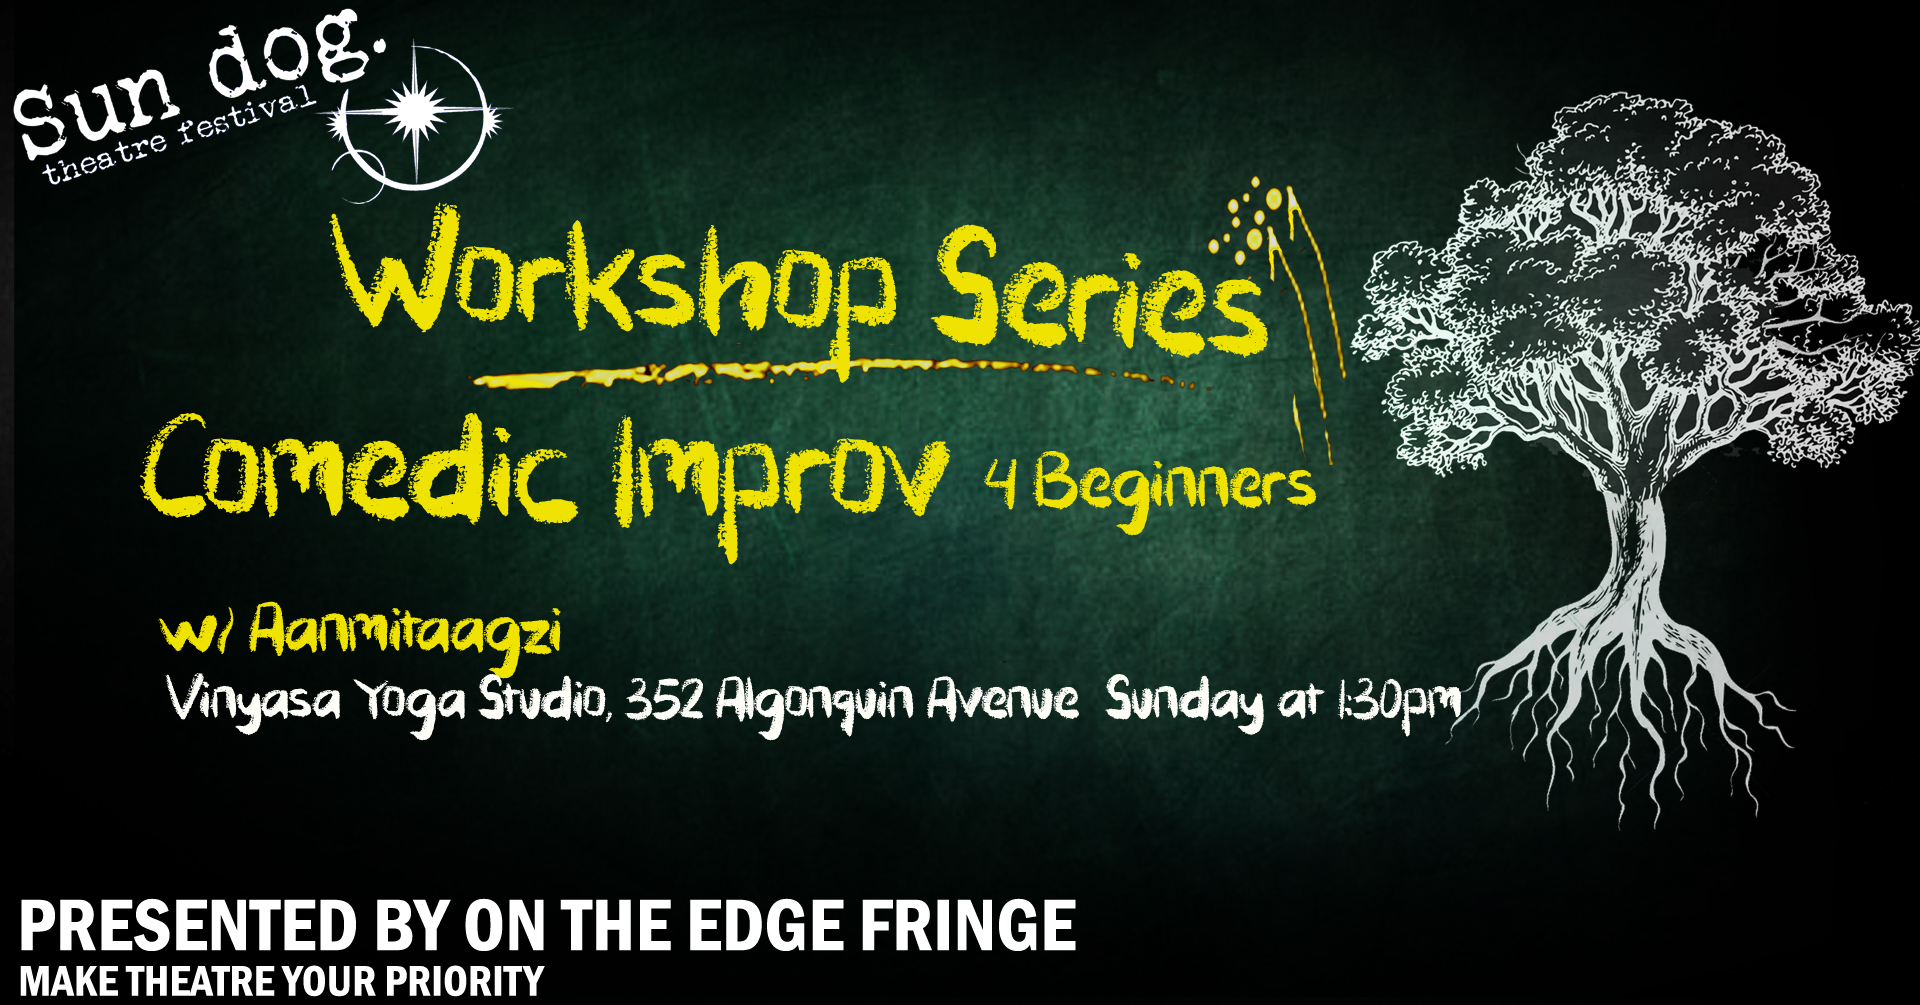 Poster for the Comedic Improv workshop for the Sun Dog Theatre Festival.